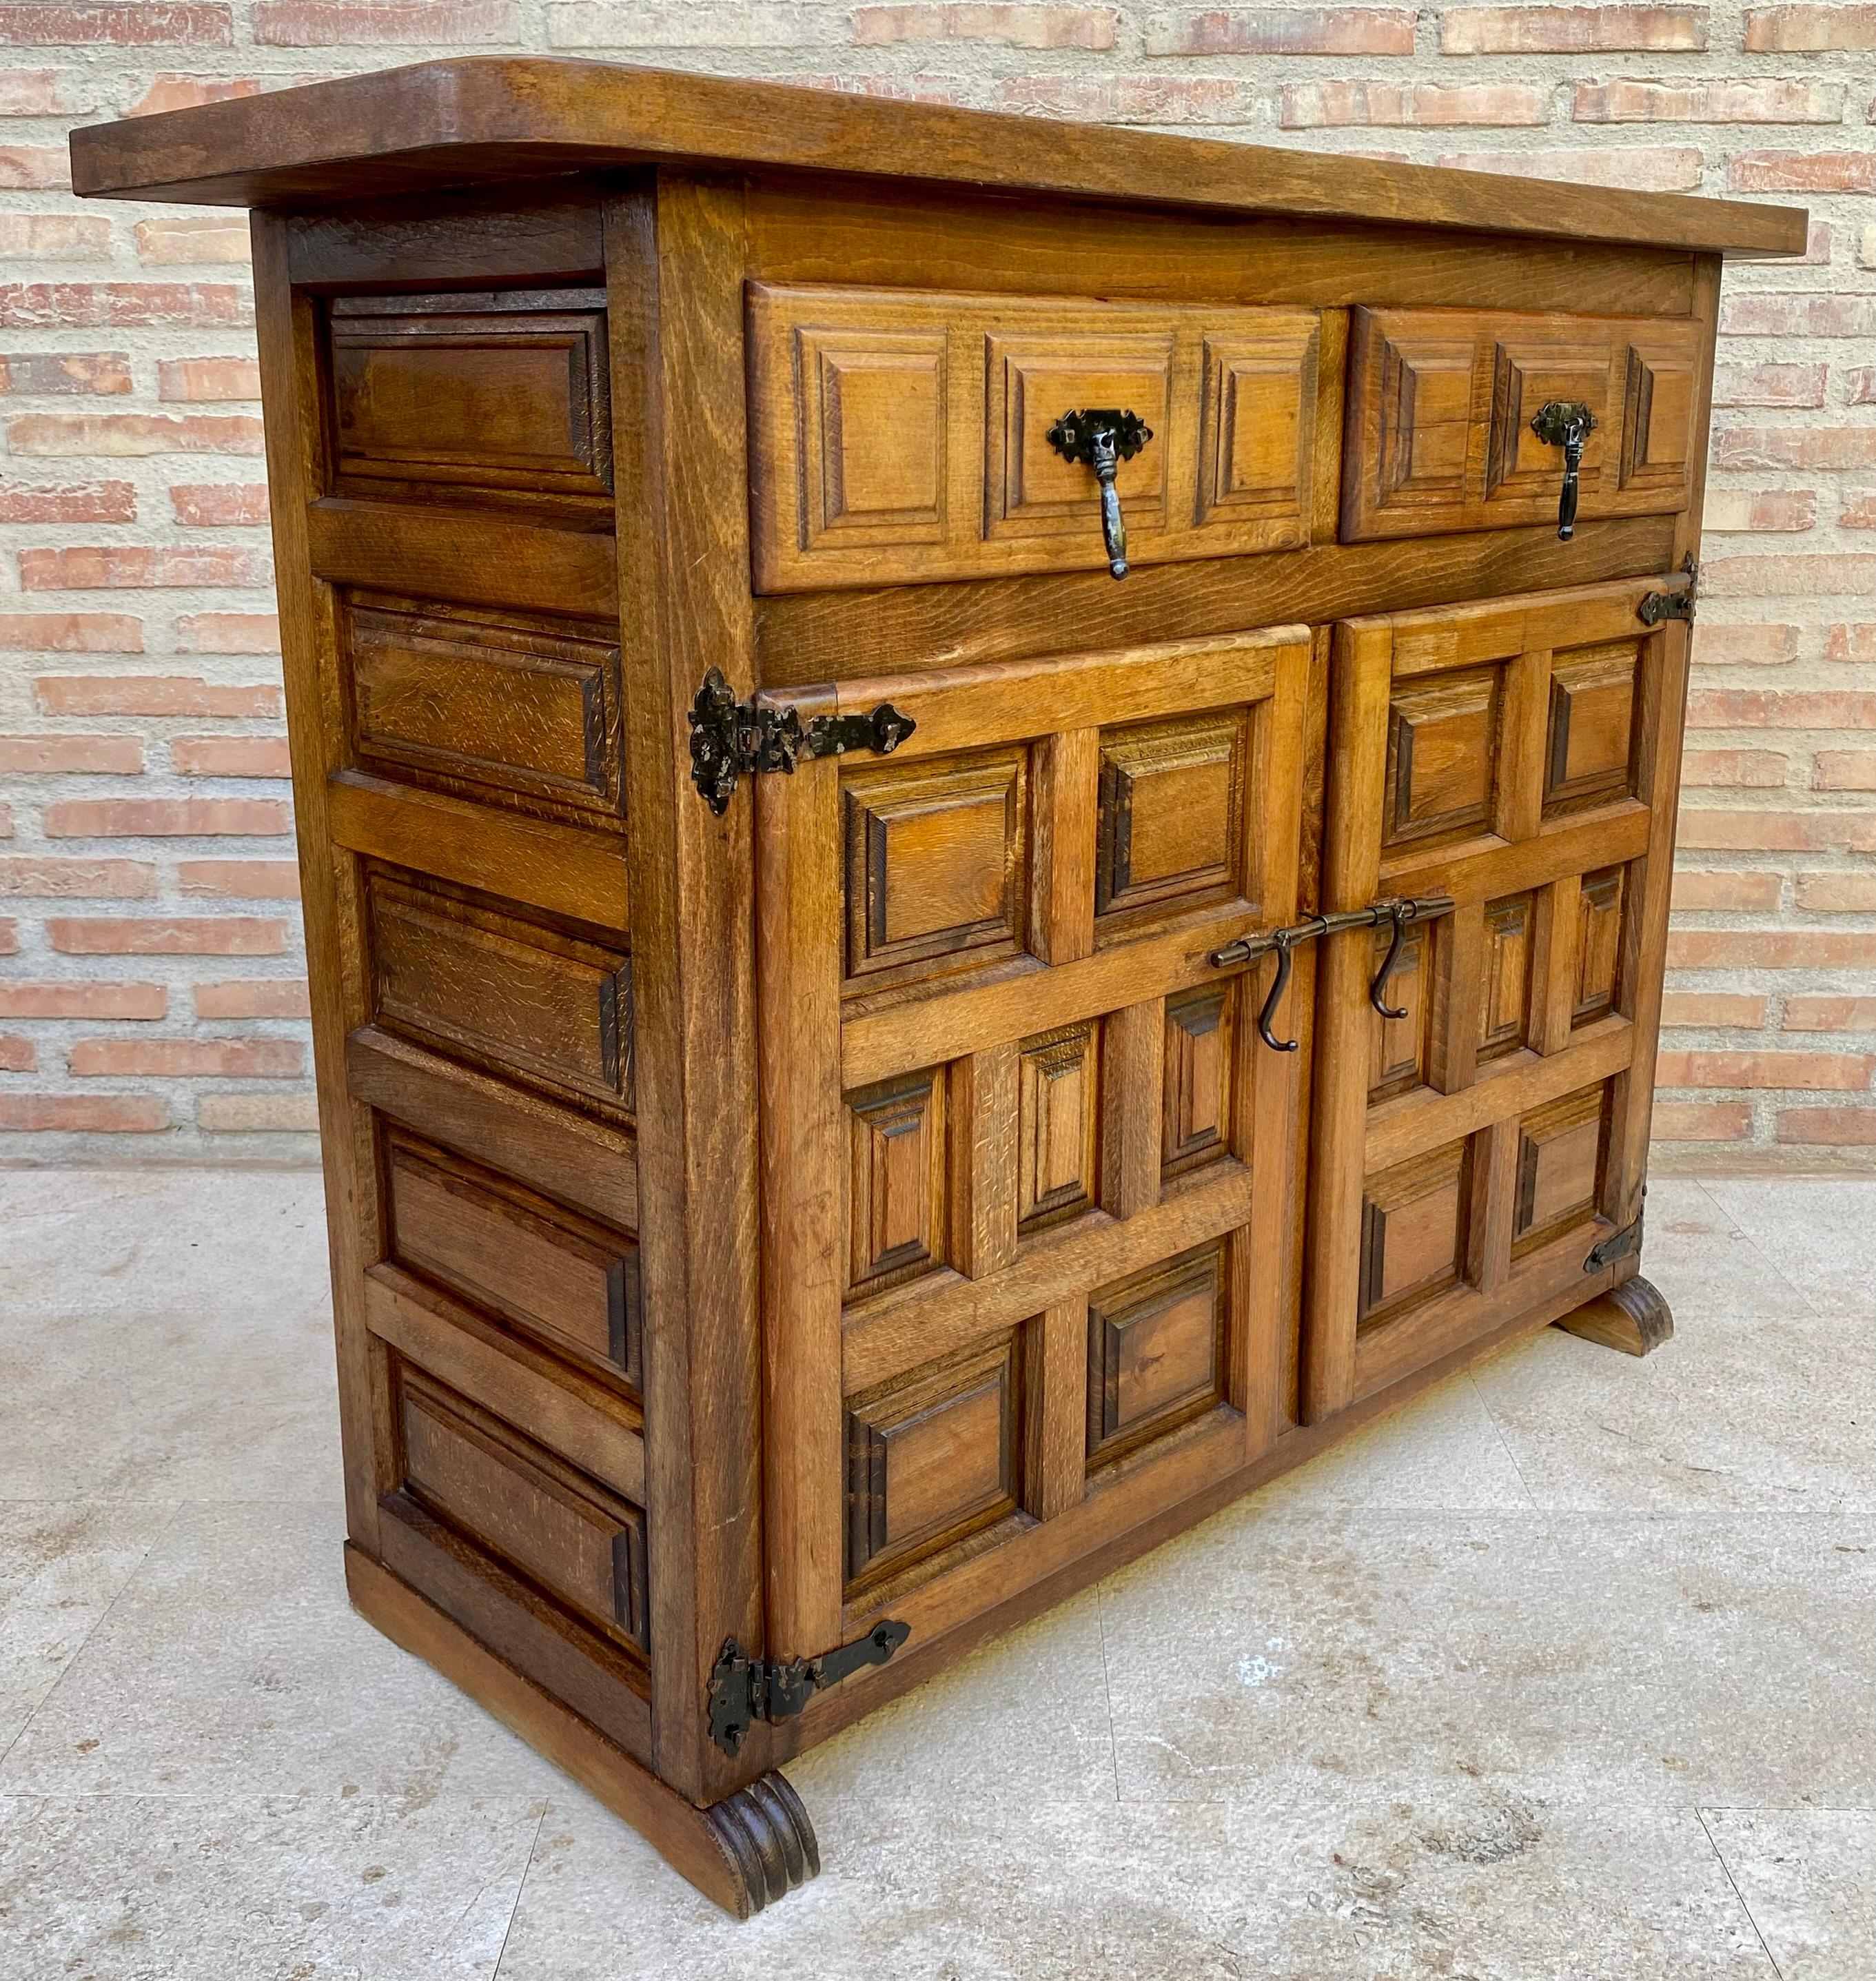 20th century Catalan Spanish carved walnut chest of drawers, highboy or console Country Provincial Chiffoniere was fashioned from solid walnut and features two drawers and two doors carved with charming detail and fitted with unusually intricate